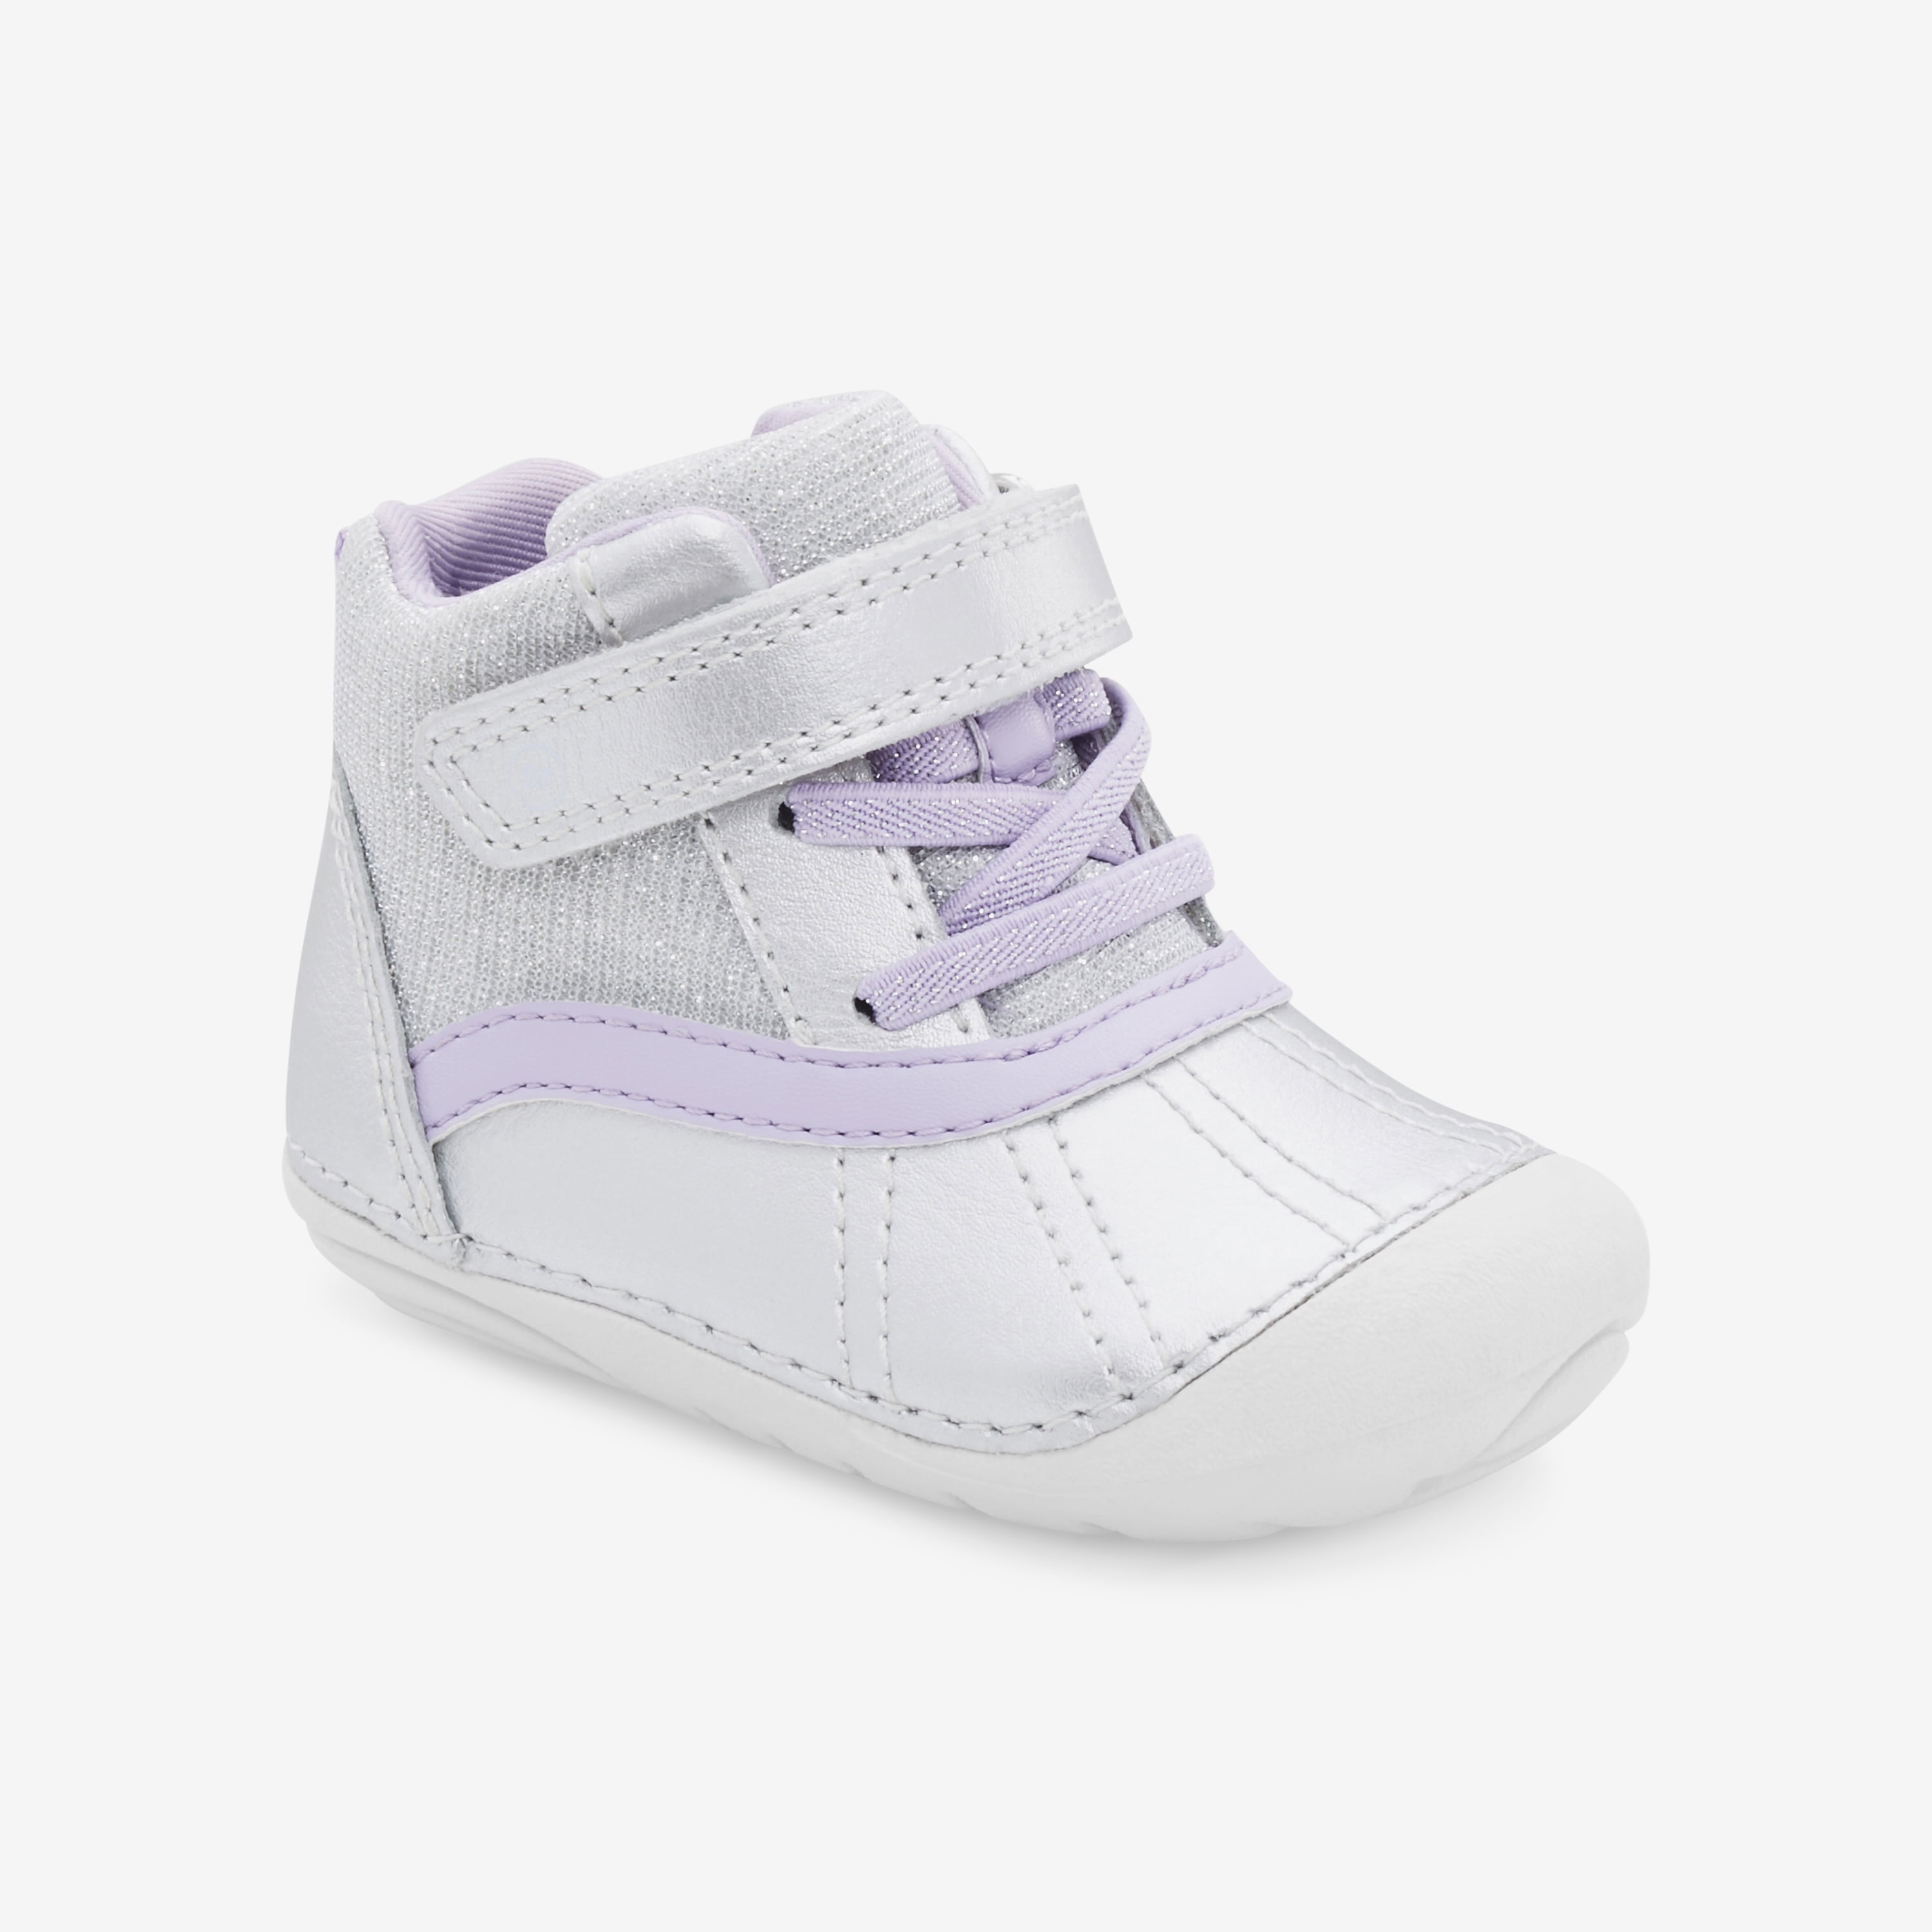 Totsy  Baby & Kids Shoes from $3